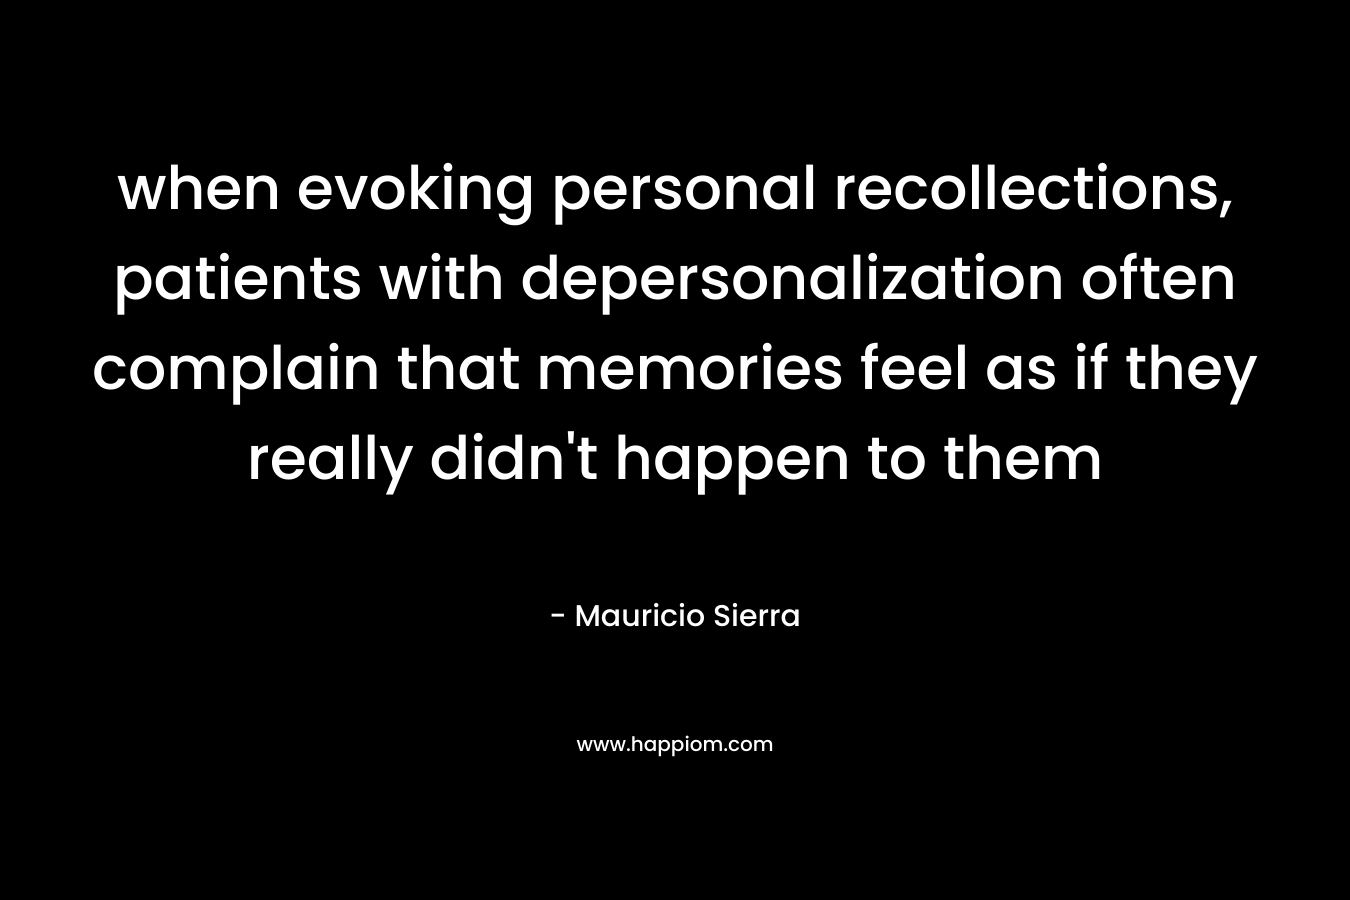 when evoking personal recollections, patients with depersonalization often complain that memories feel as if they really didn't happen to them